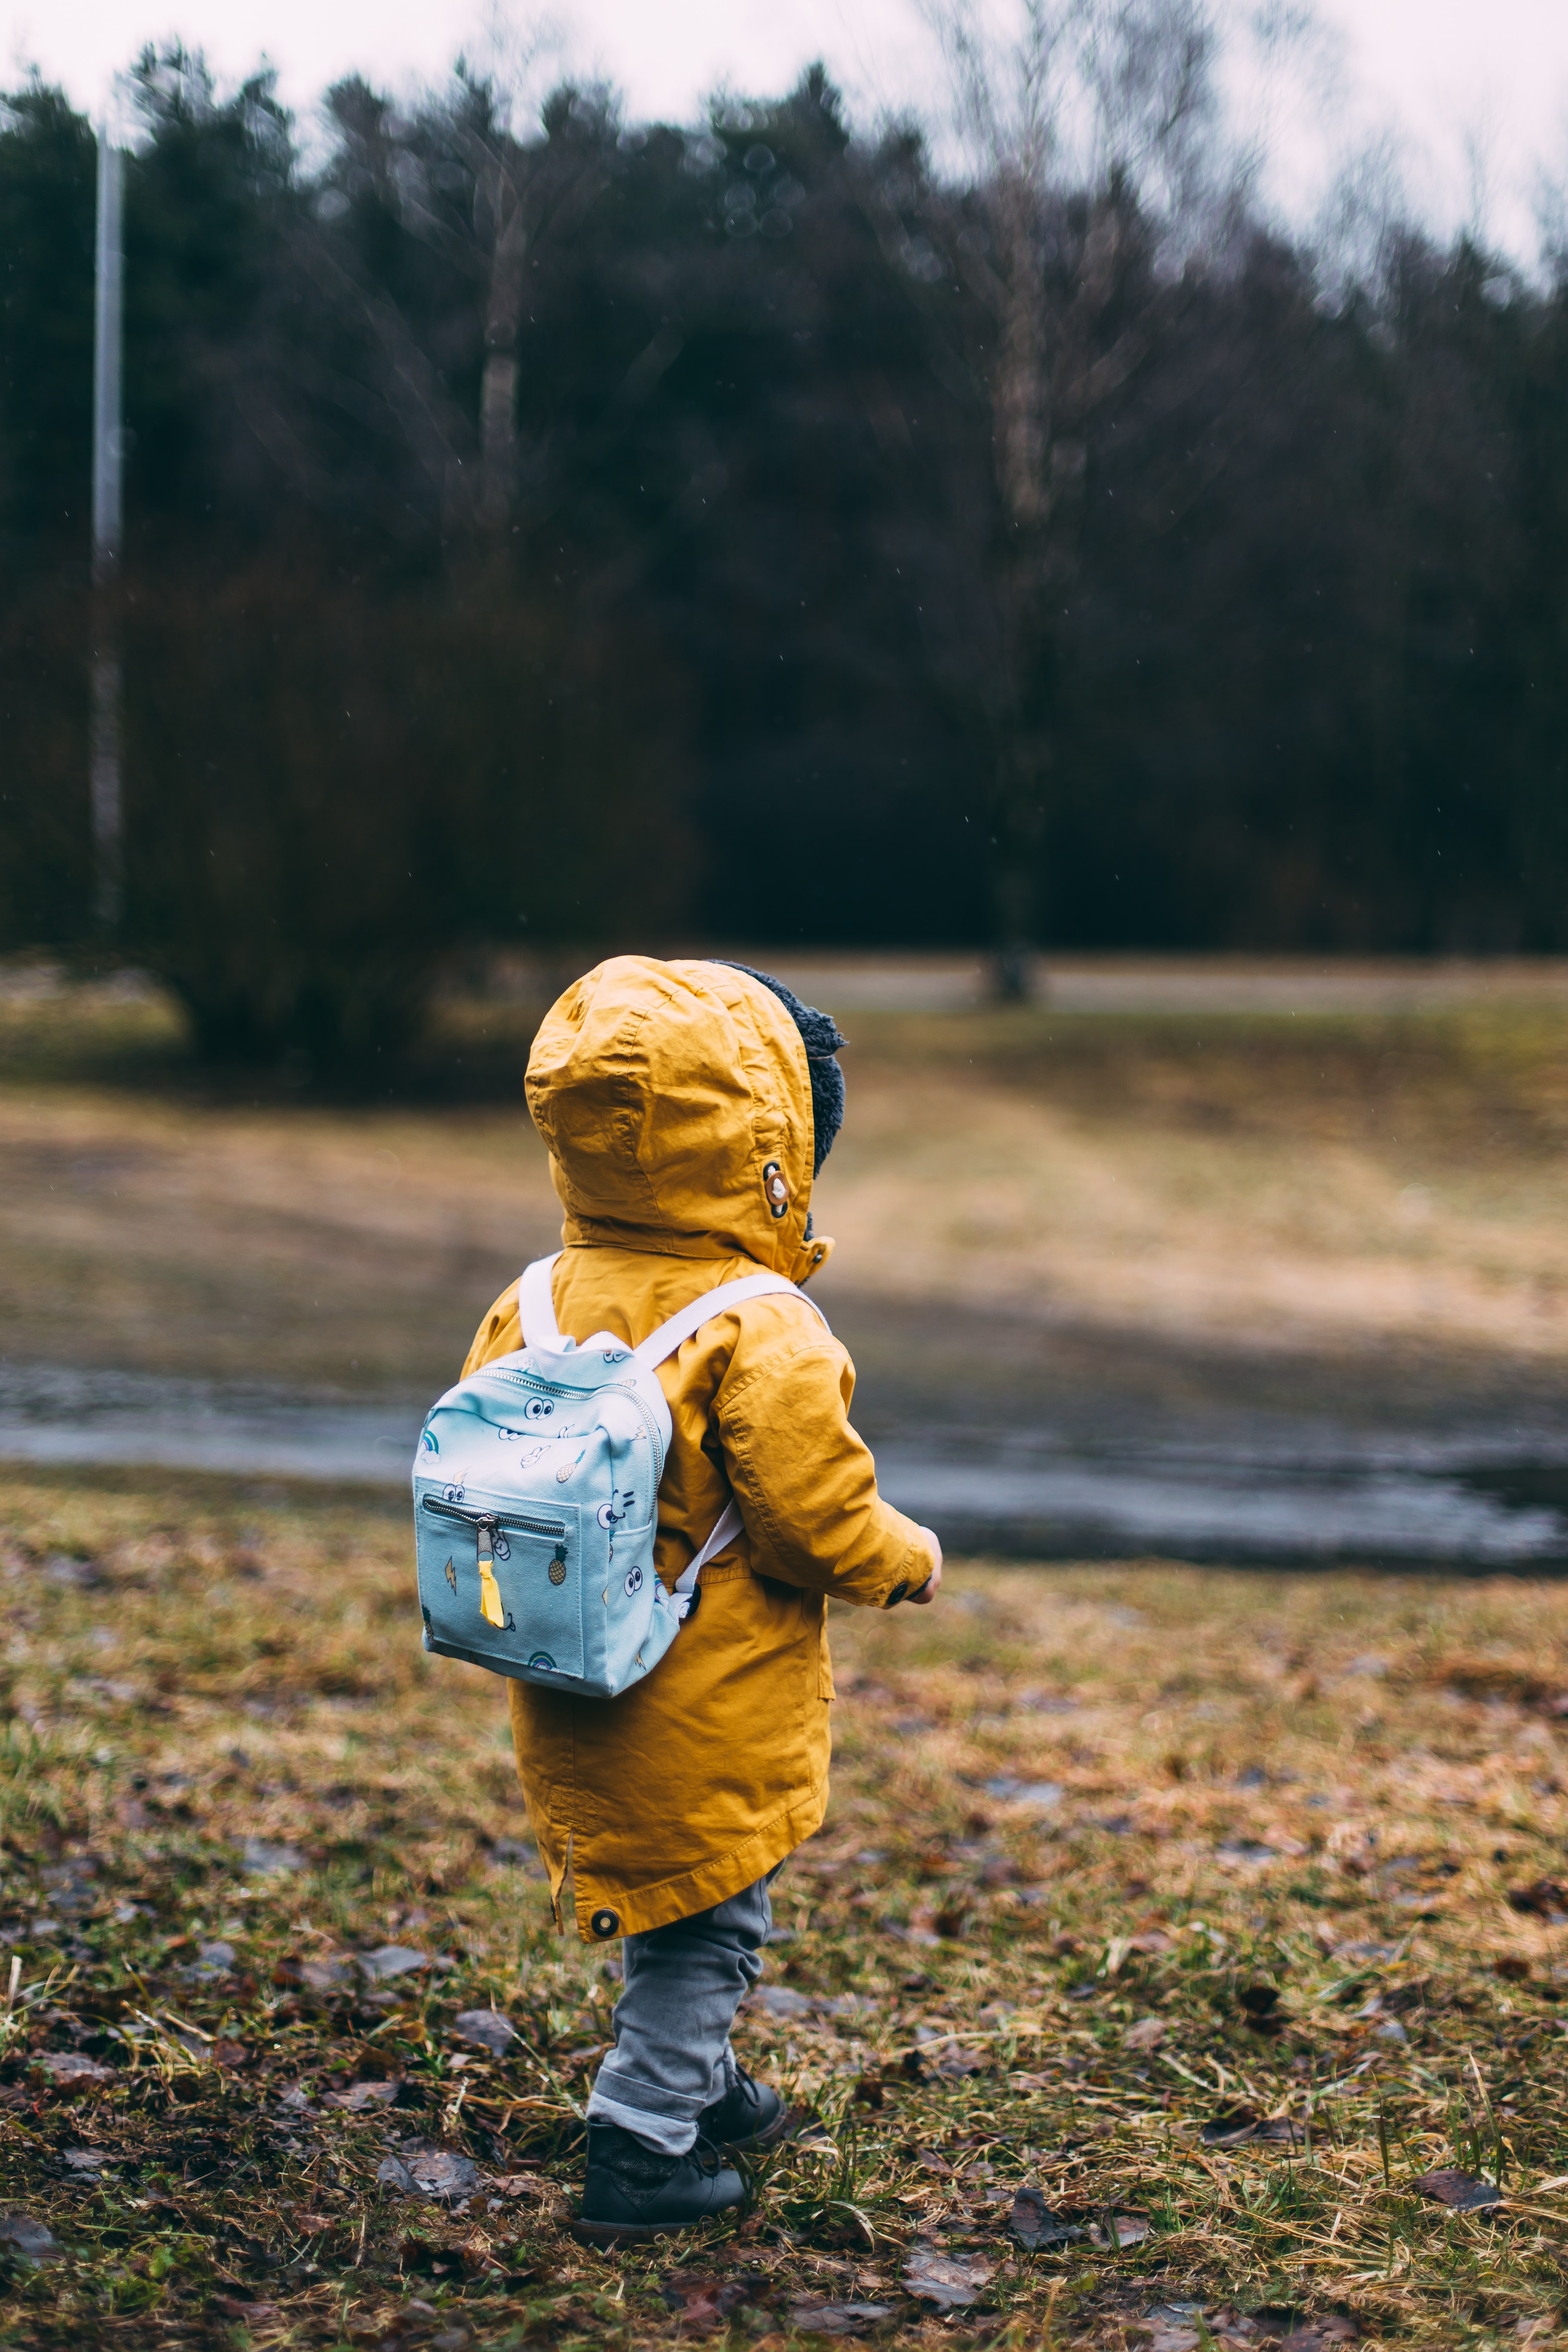 Student walking in the rain with raincoat and backpack